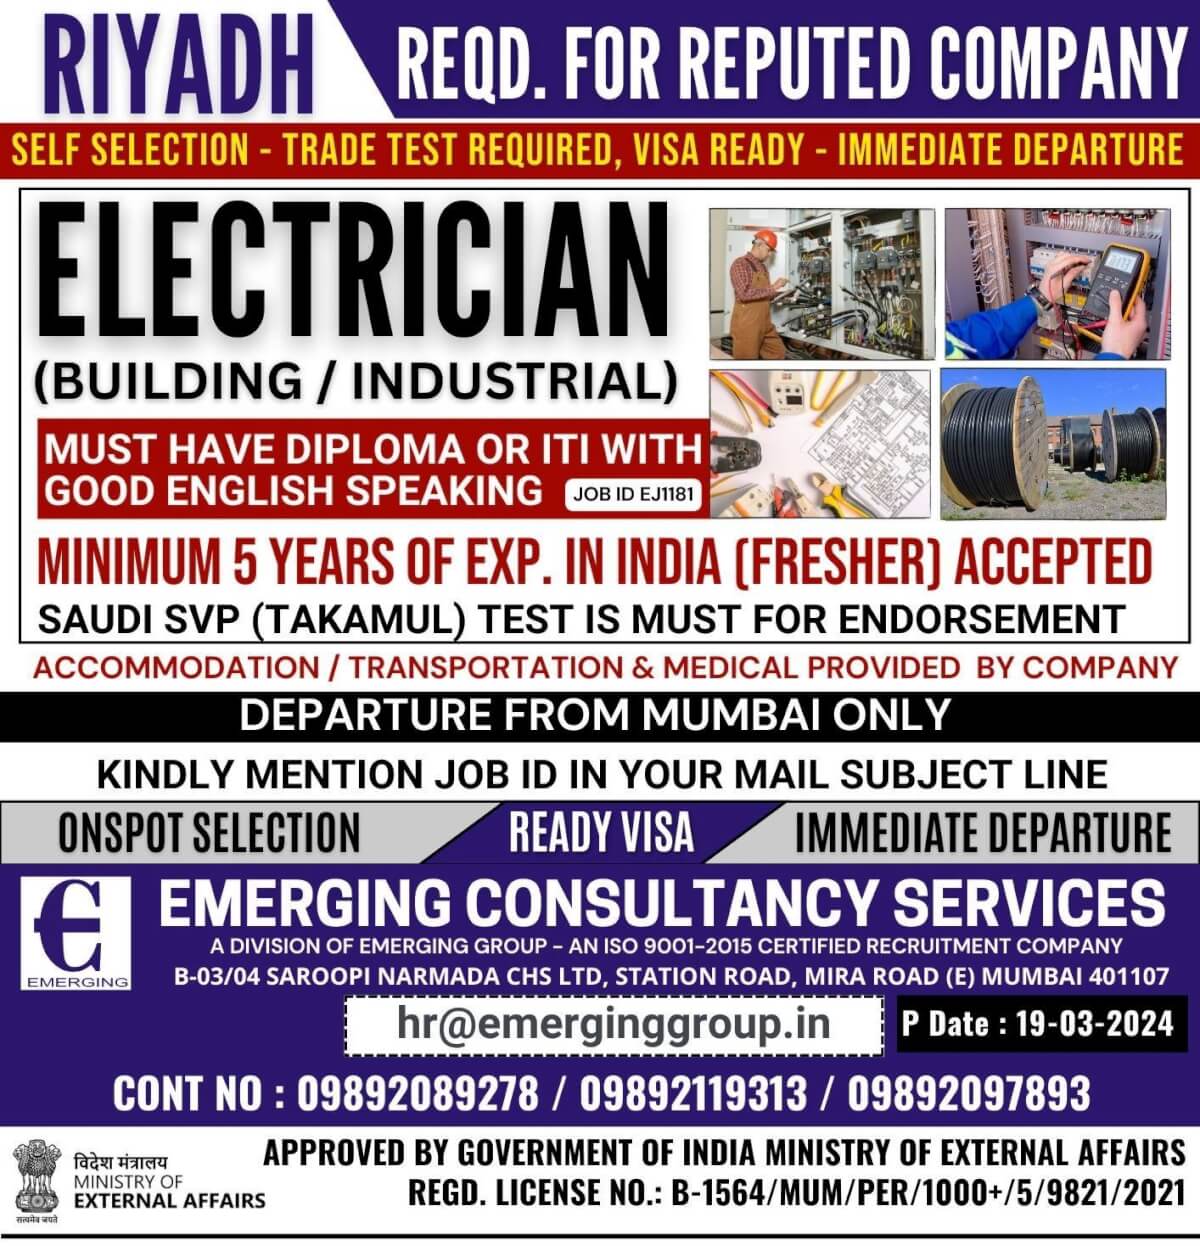 URGENTLY REQD. FOR REPUTED COMPANY IN SAUDI ARABIA